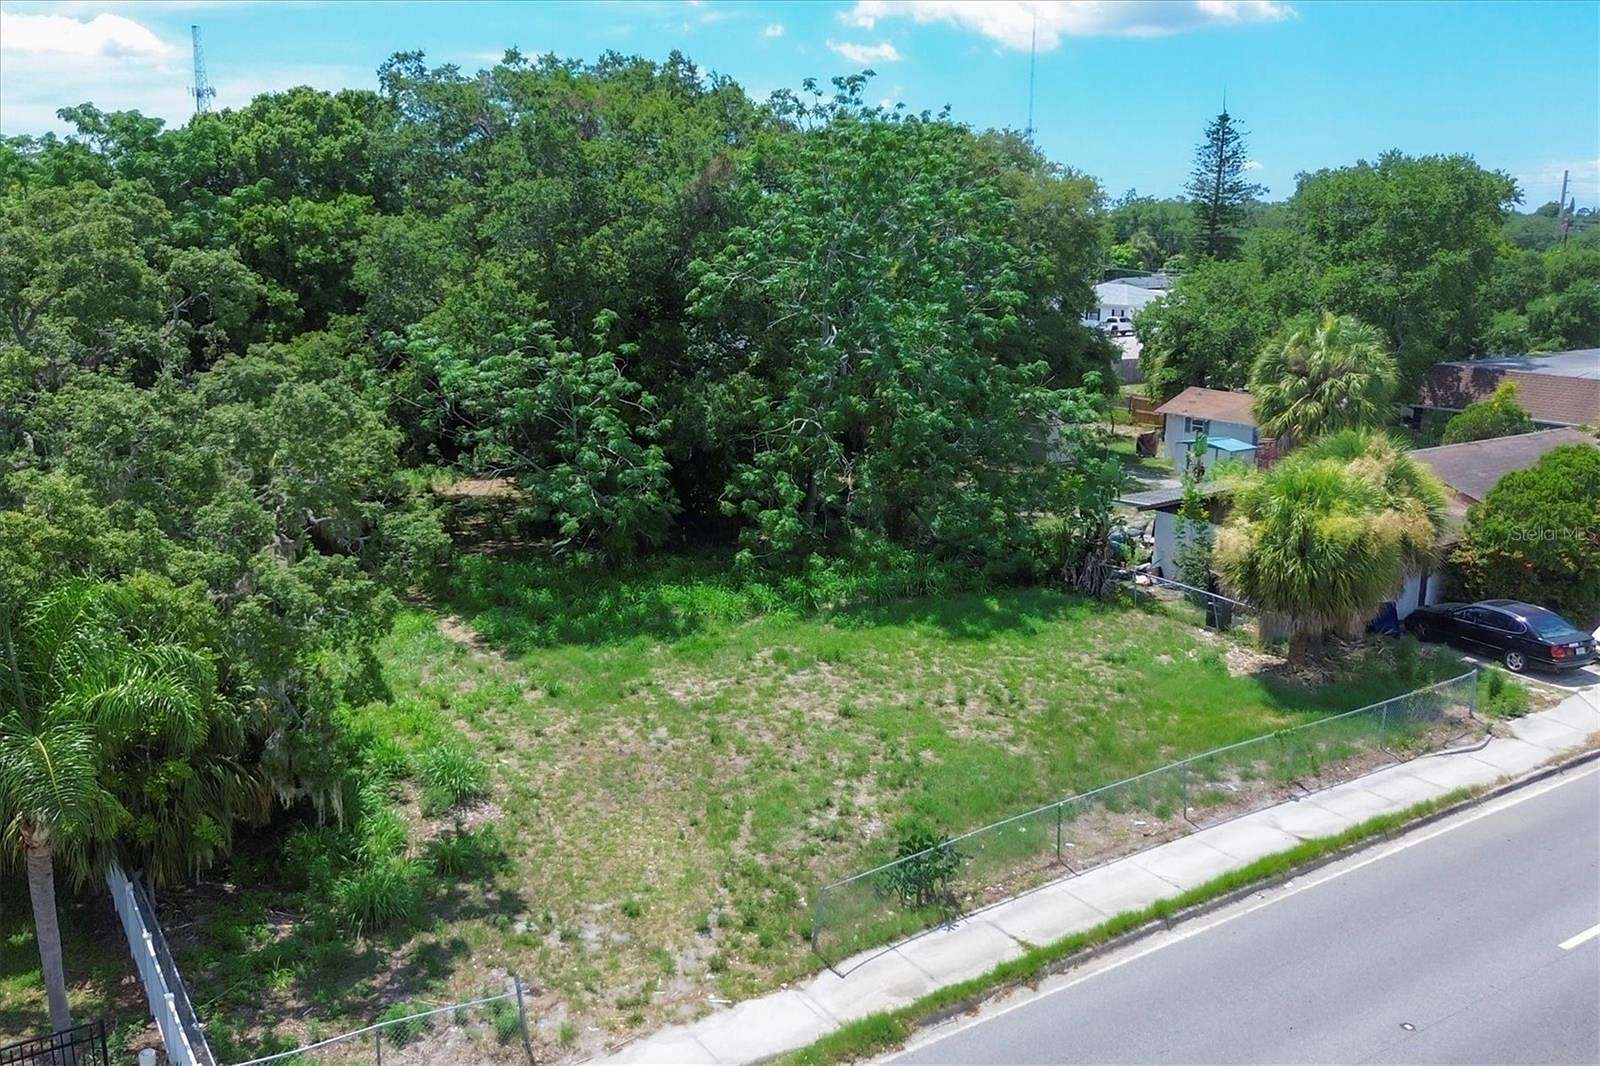 0.35 Acres of Mixed-Use Land for Sale in Bradenton, Florida